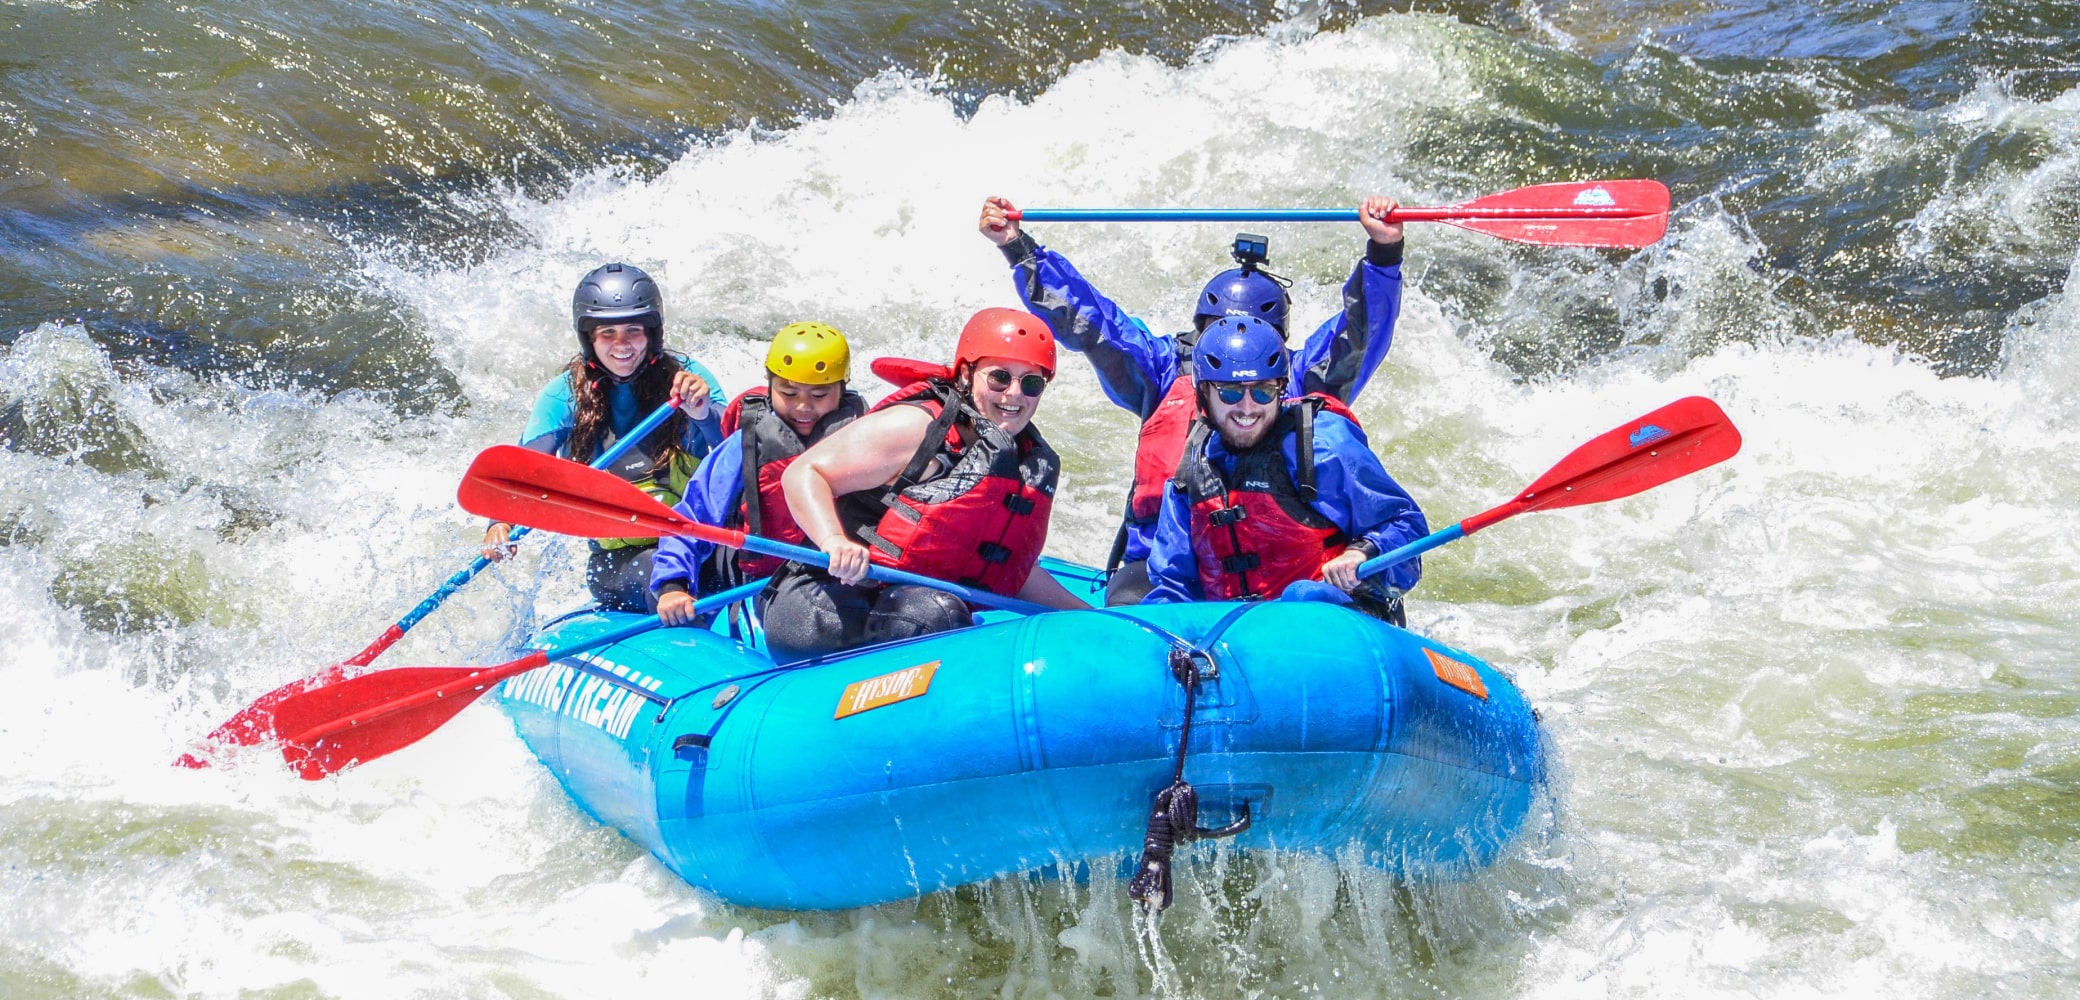 Group enjoys white water rafting trip for beginners in colorado